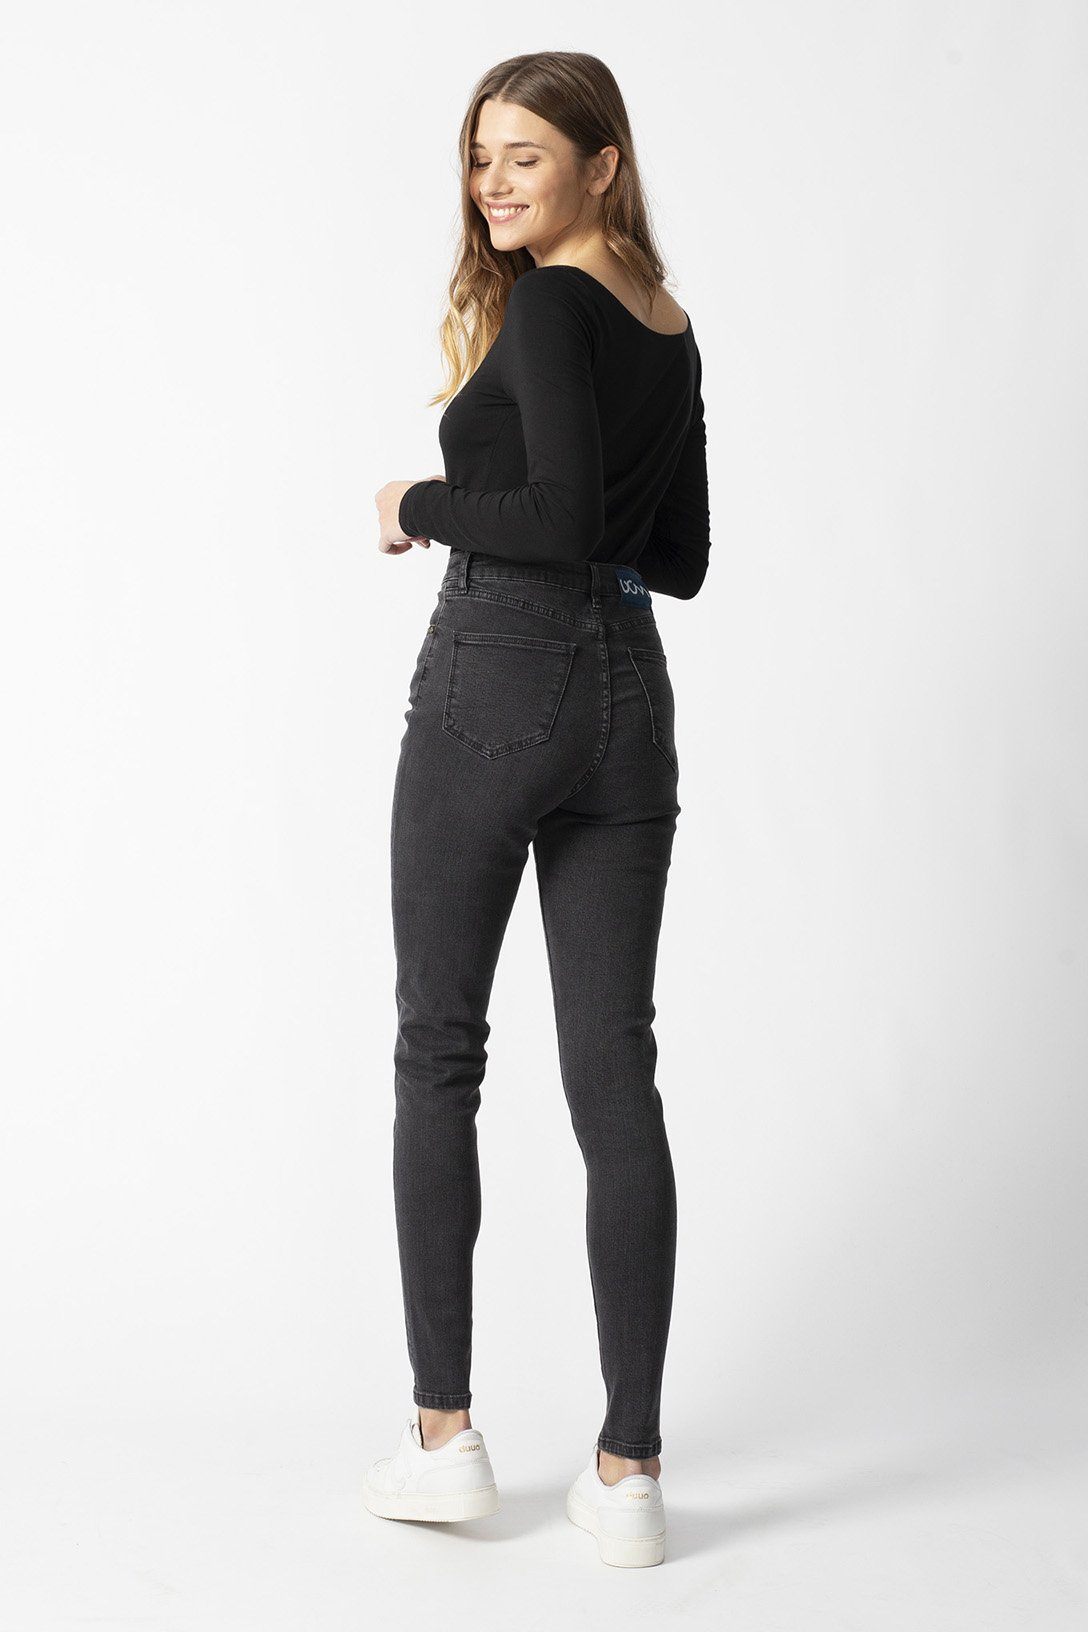 CARRIE dark grey - GOTS organic cotton Jeans by UCM